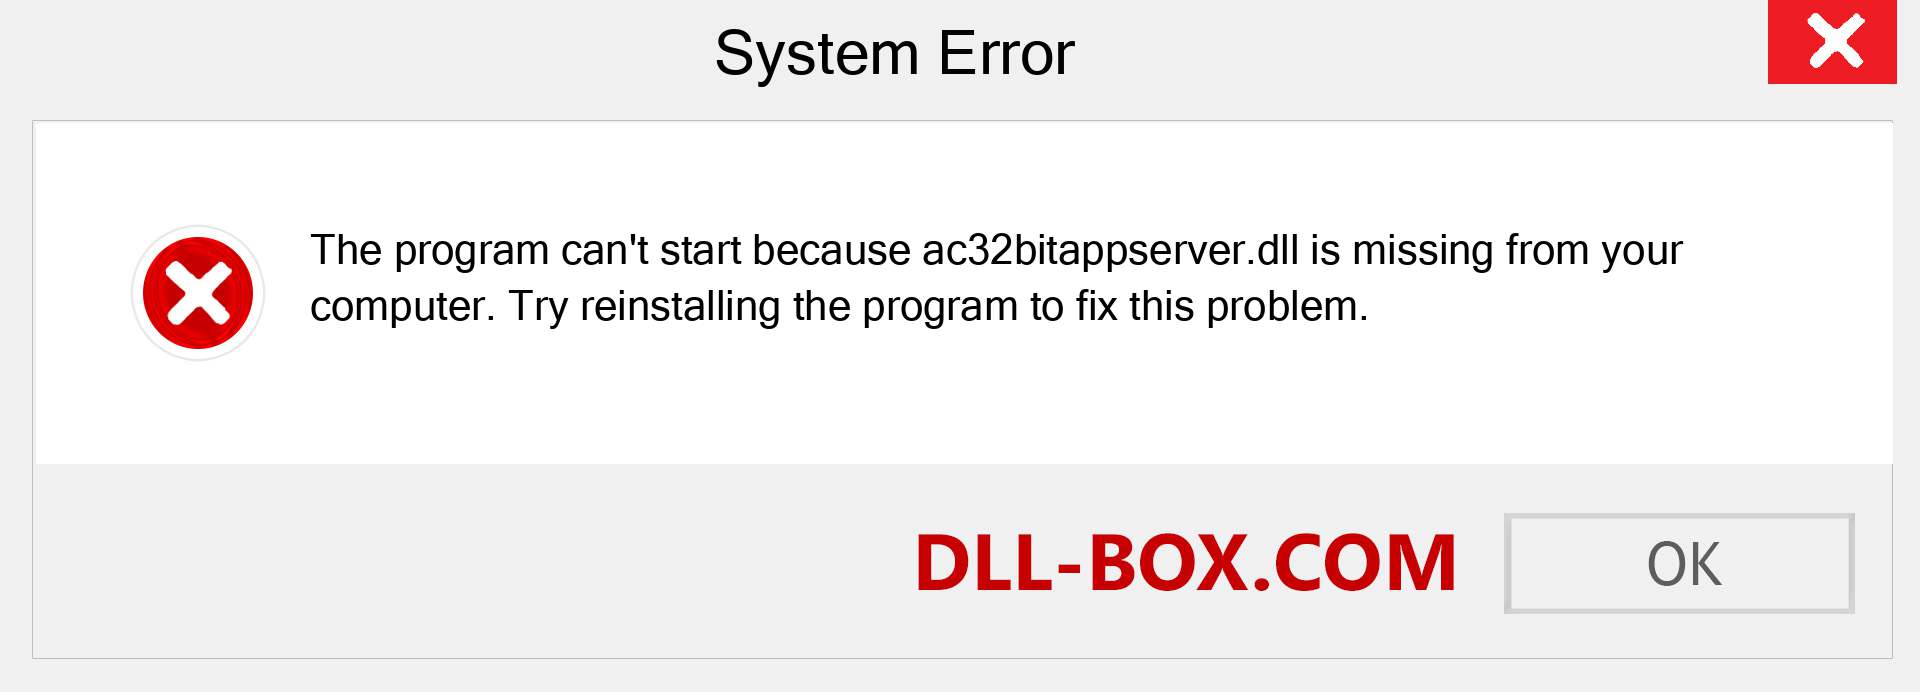  ac32bitappserver.dll file is missing?. Download for Windows 7, 8, 10 - Fix  ac32bitappserver dll Missing Error on Windows, photos, images